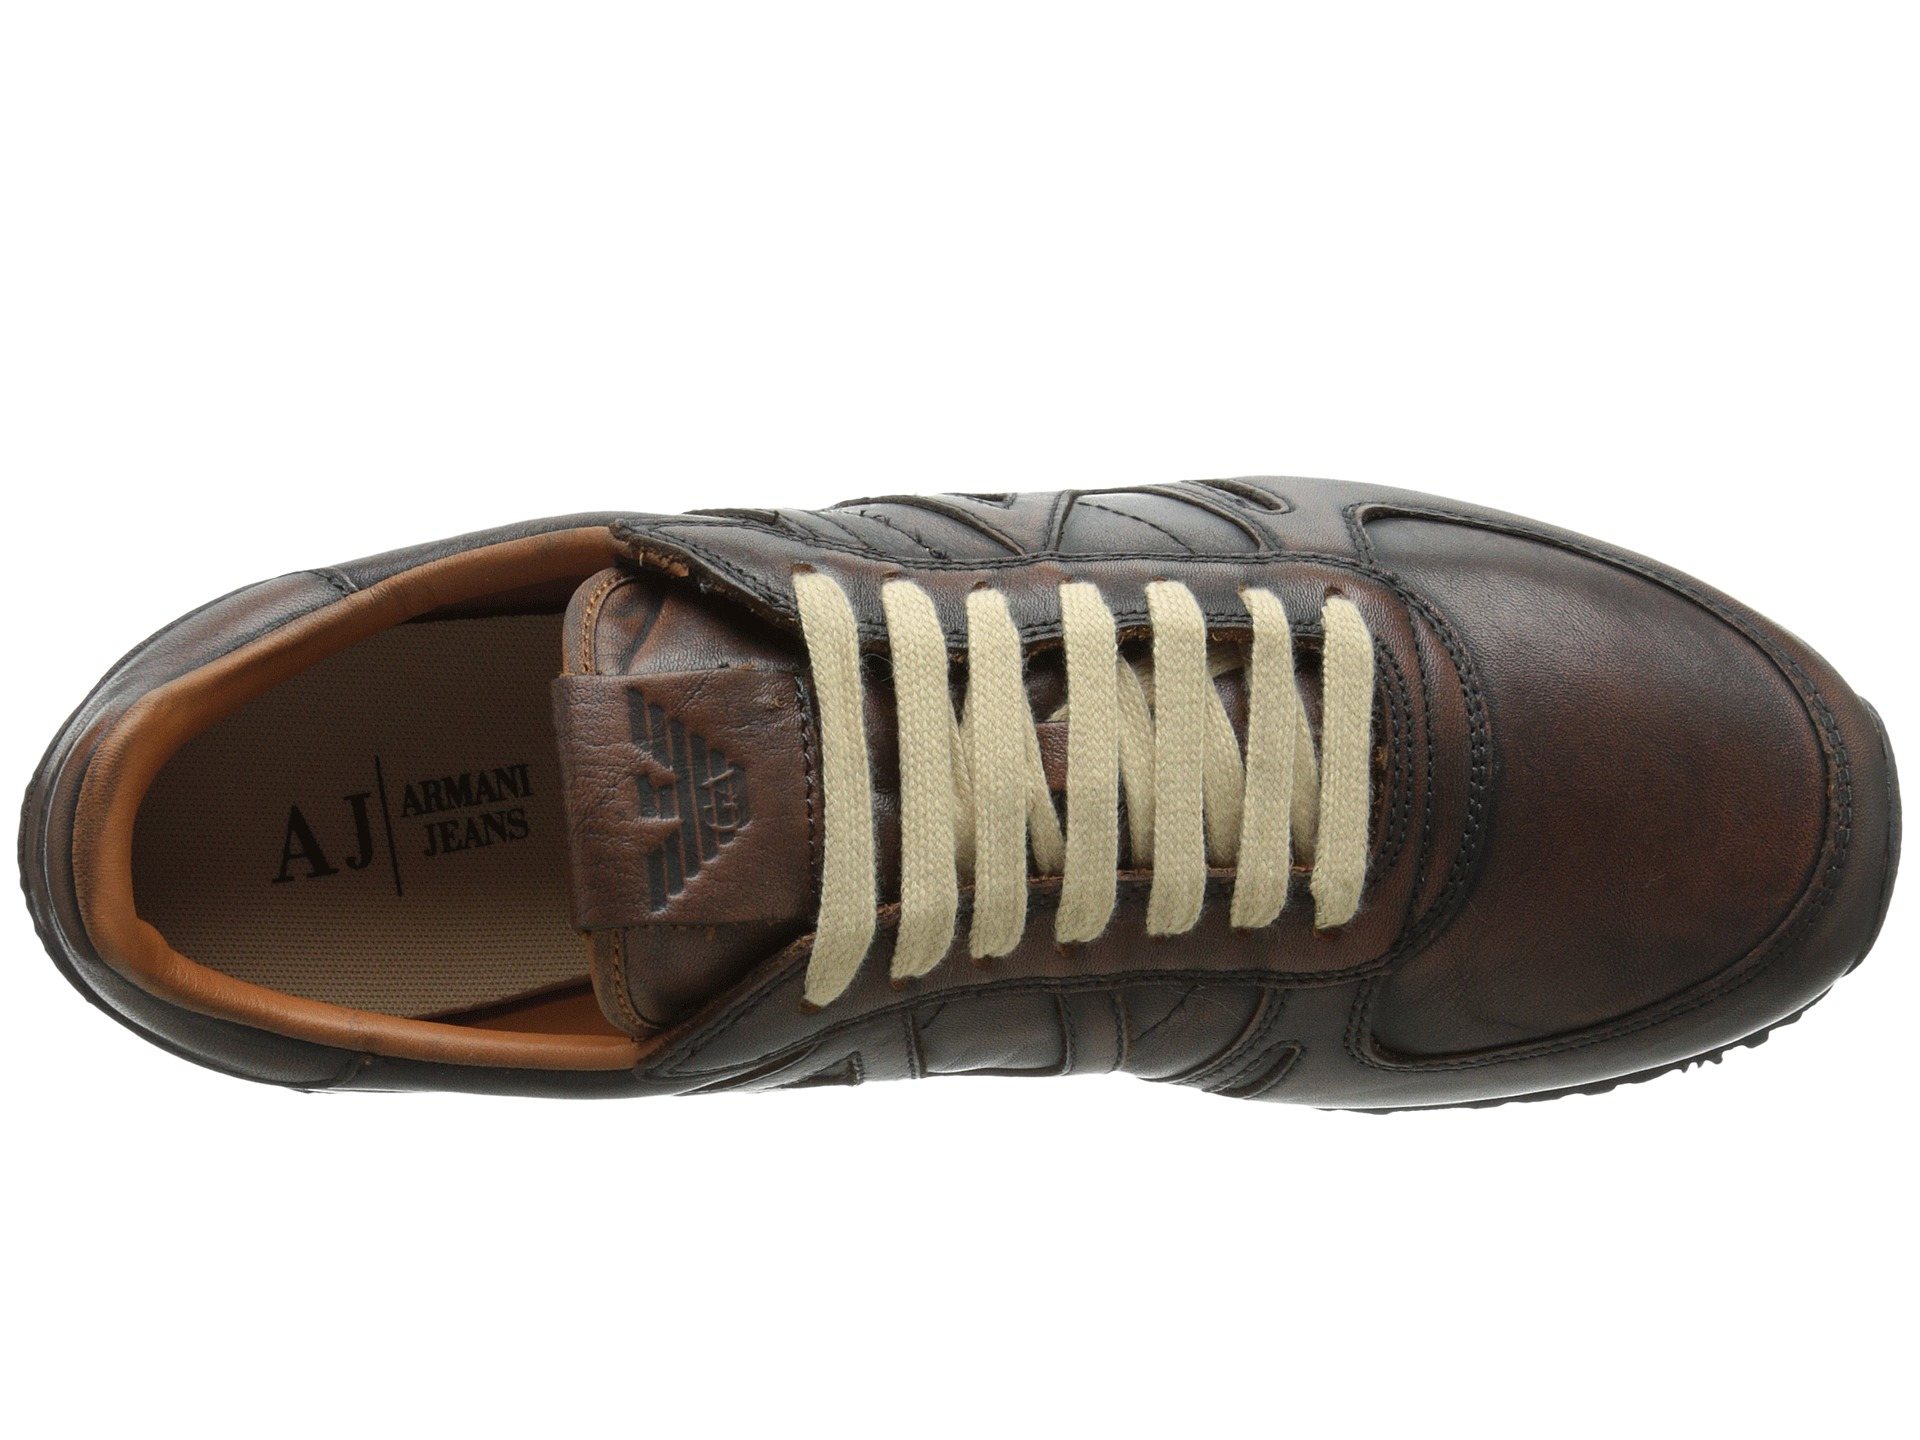 Armani Jeans Vintage Leather Trainer in 